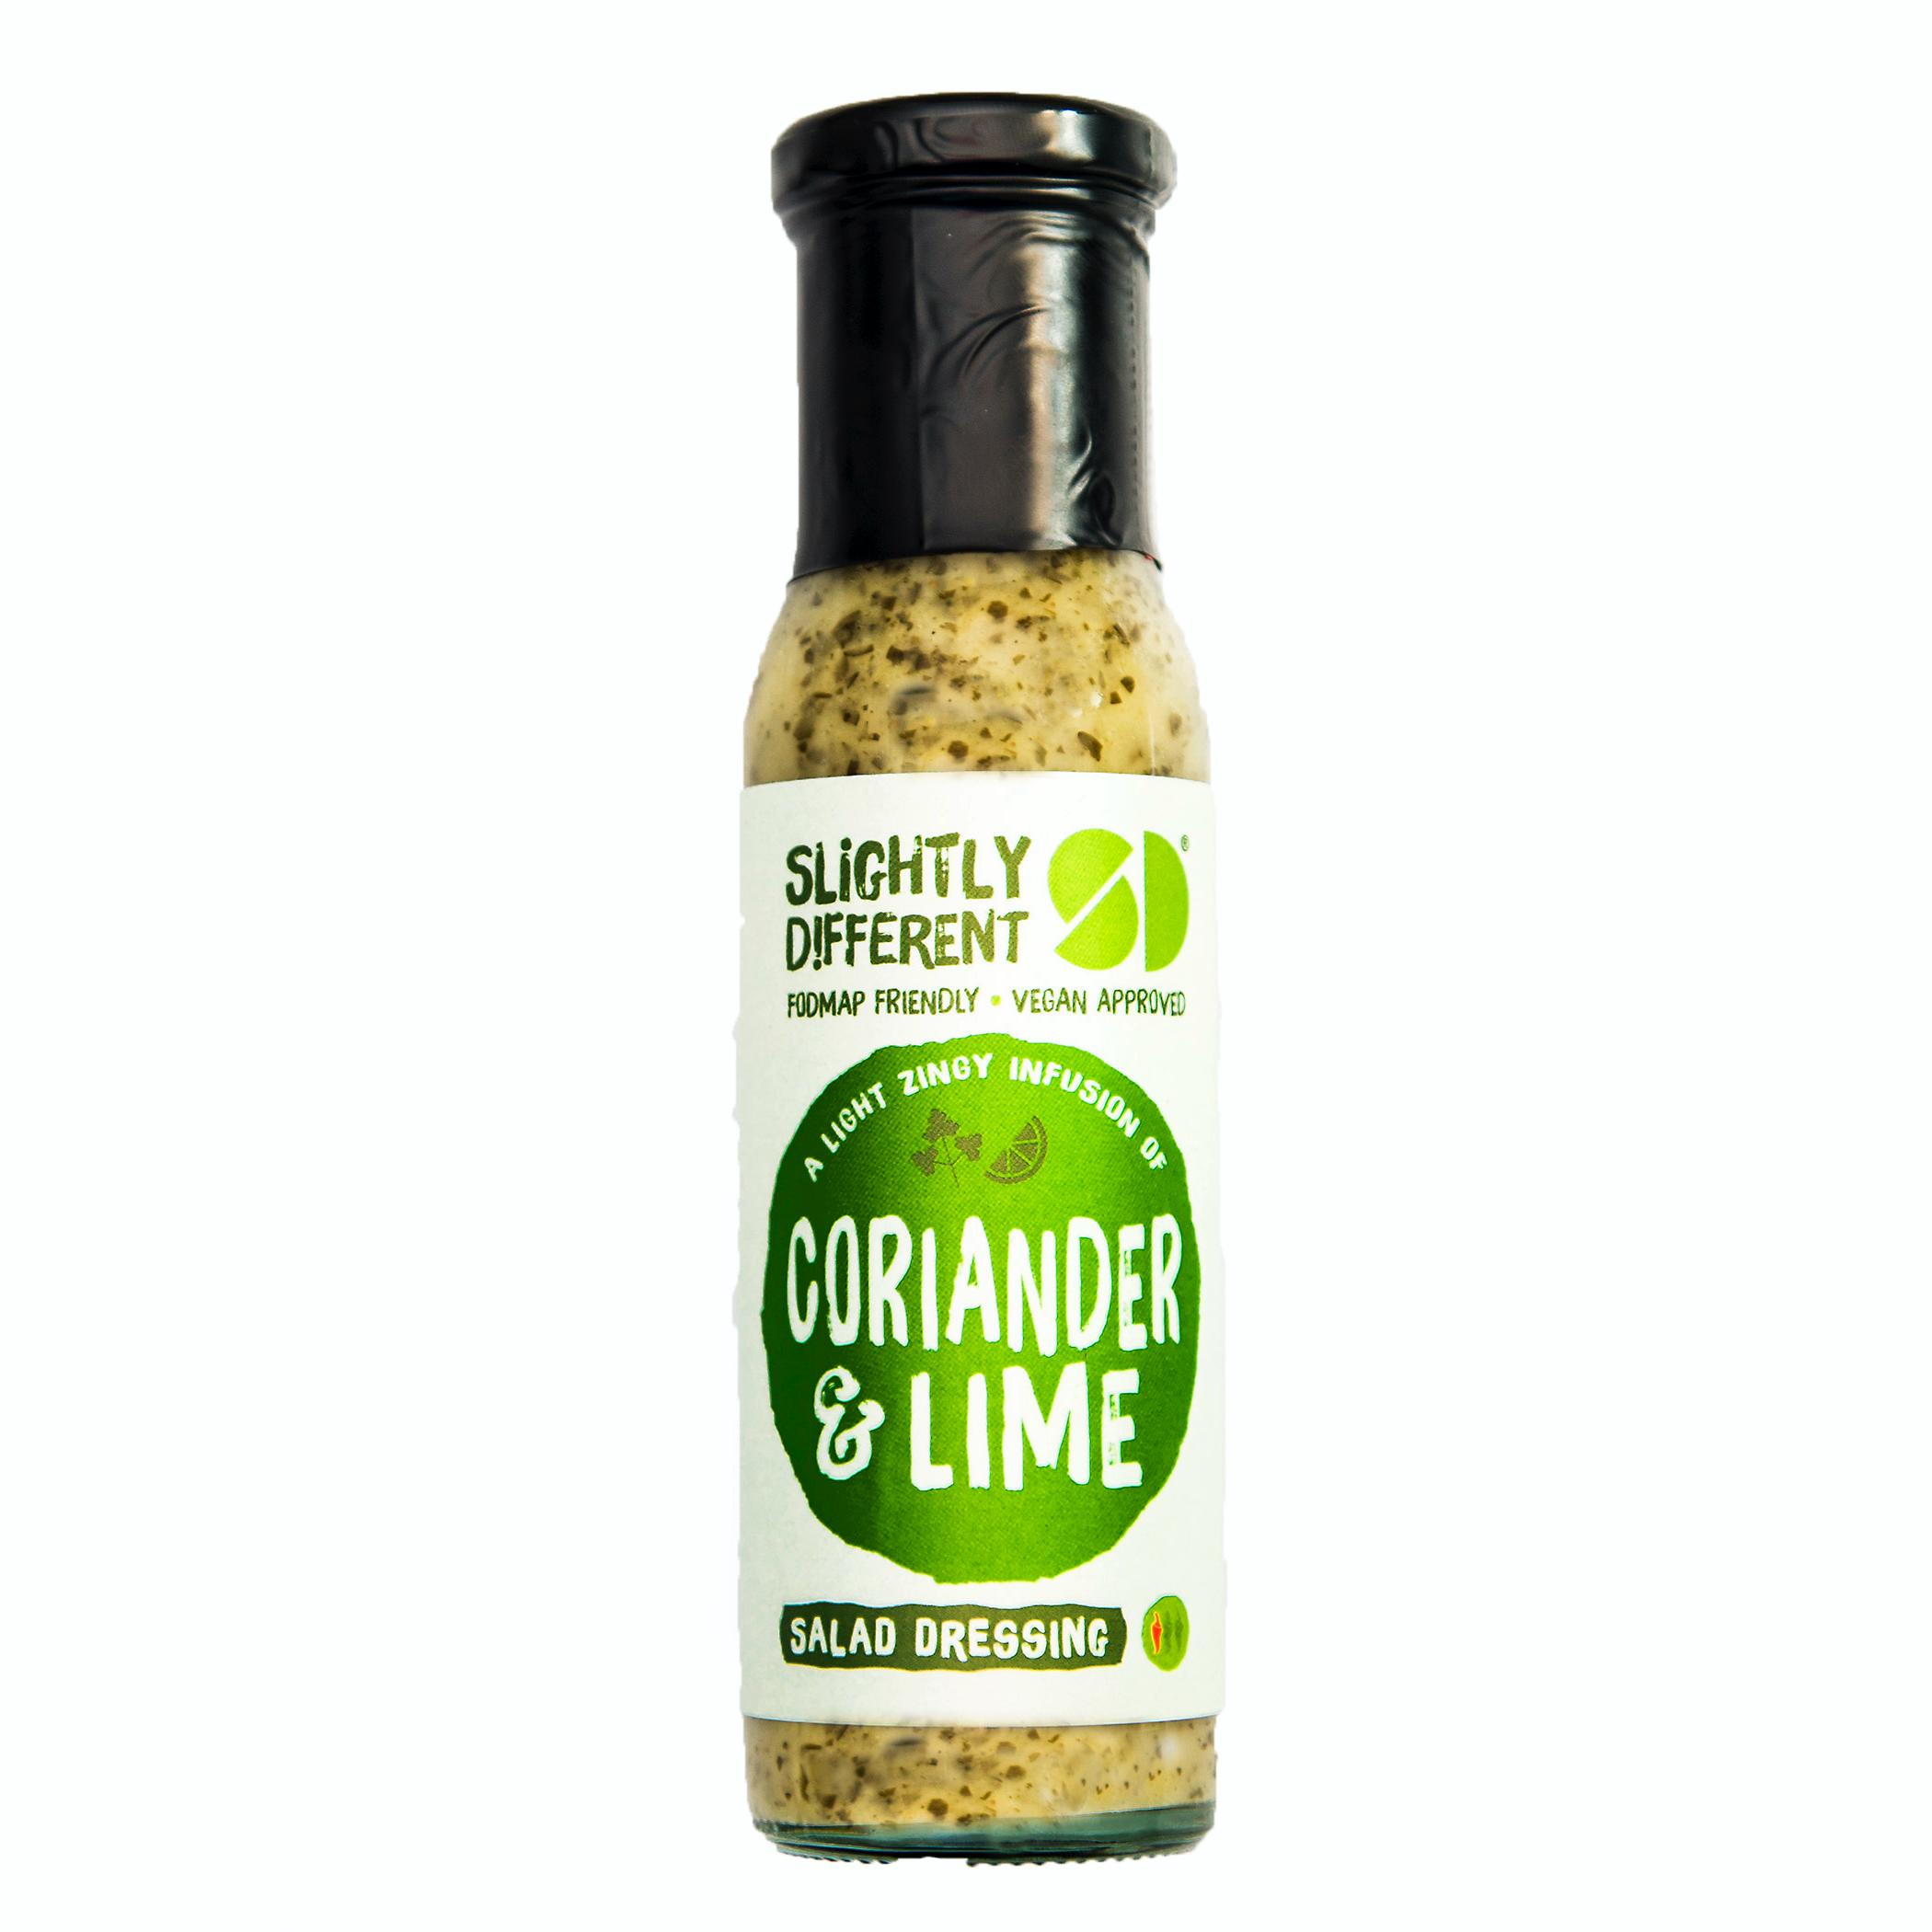 A bottle of Slightly Different's Coriander & Lime Salad Dressing